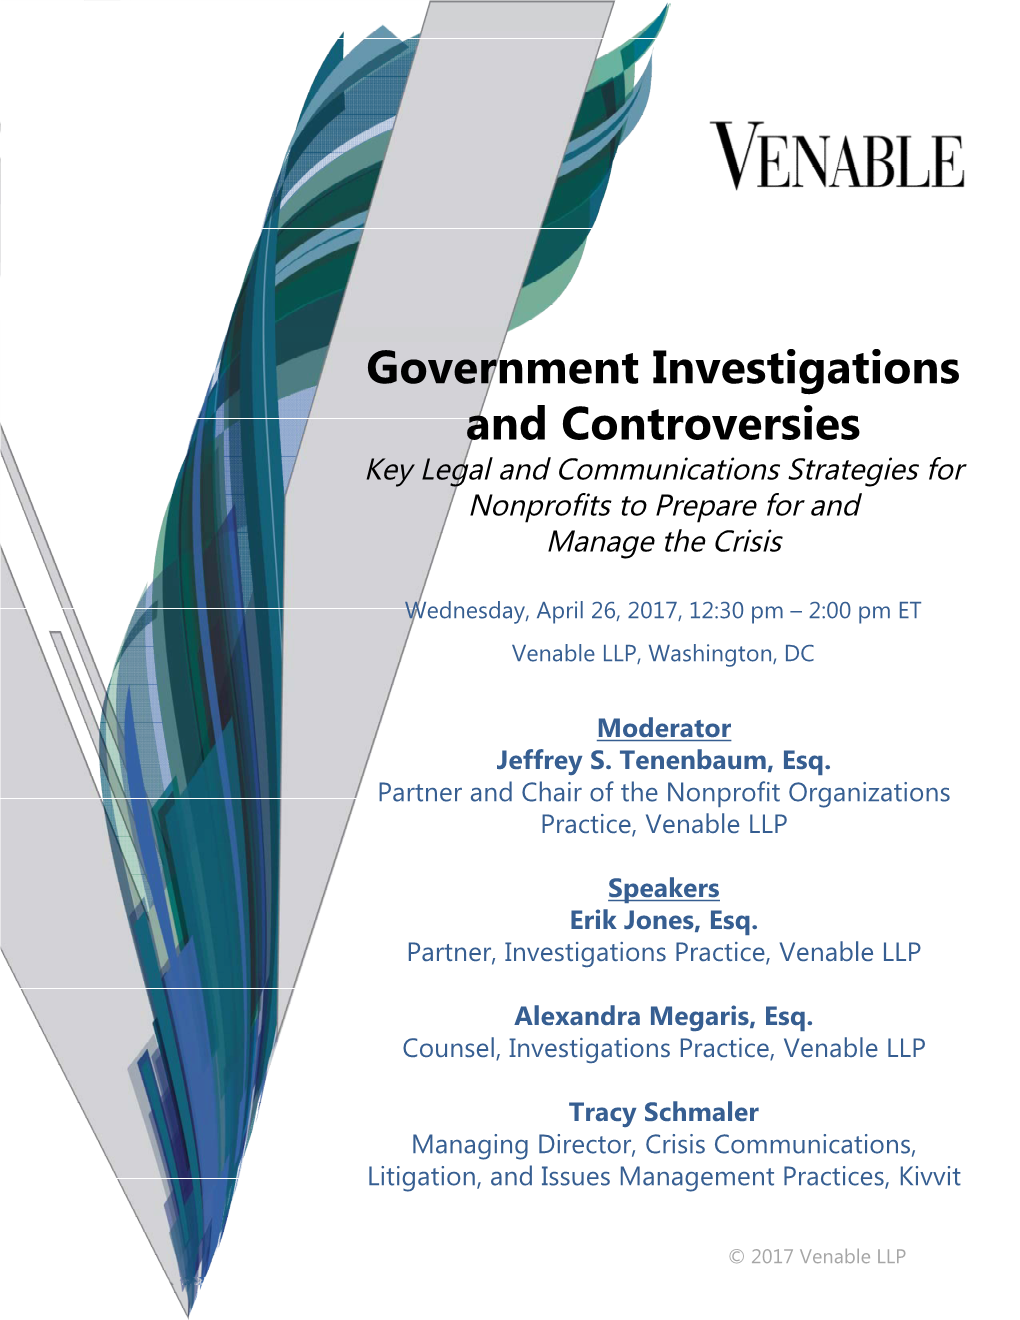 Government Investigations and Controversies Key Legal and Communications Strategies for Nonprofits to Prepare for and Manage the Crisis